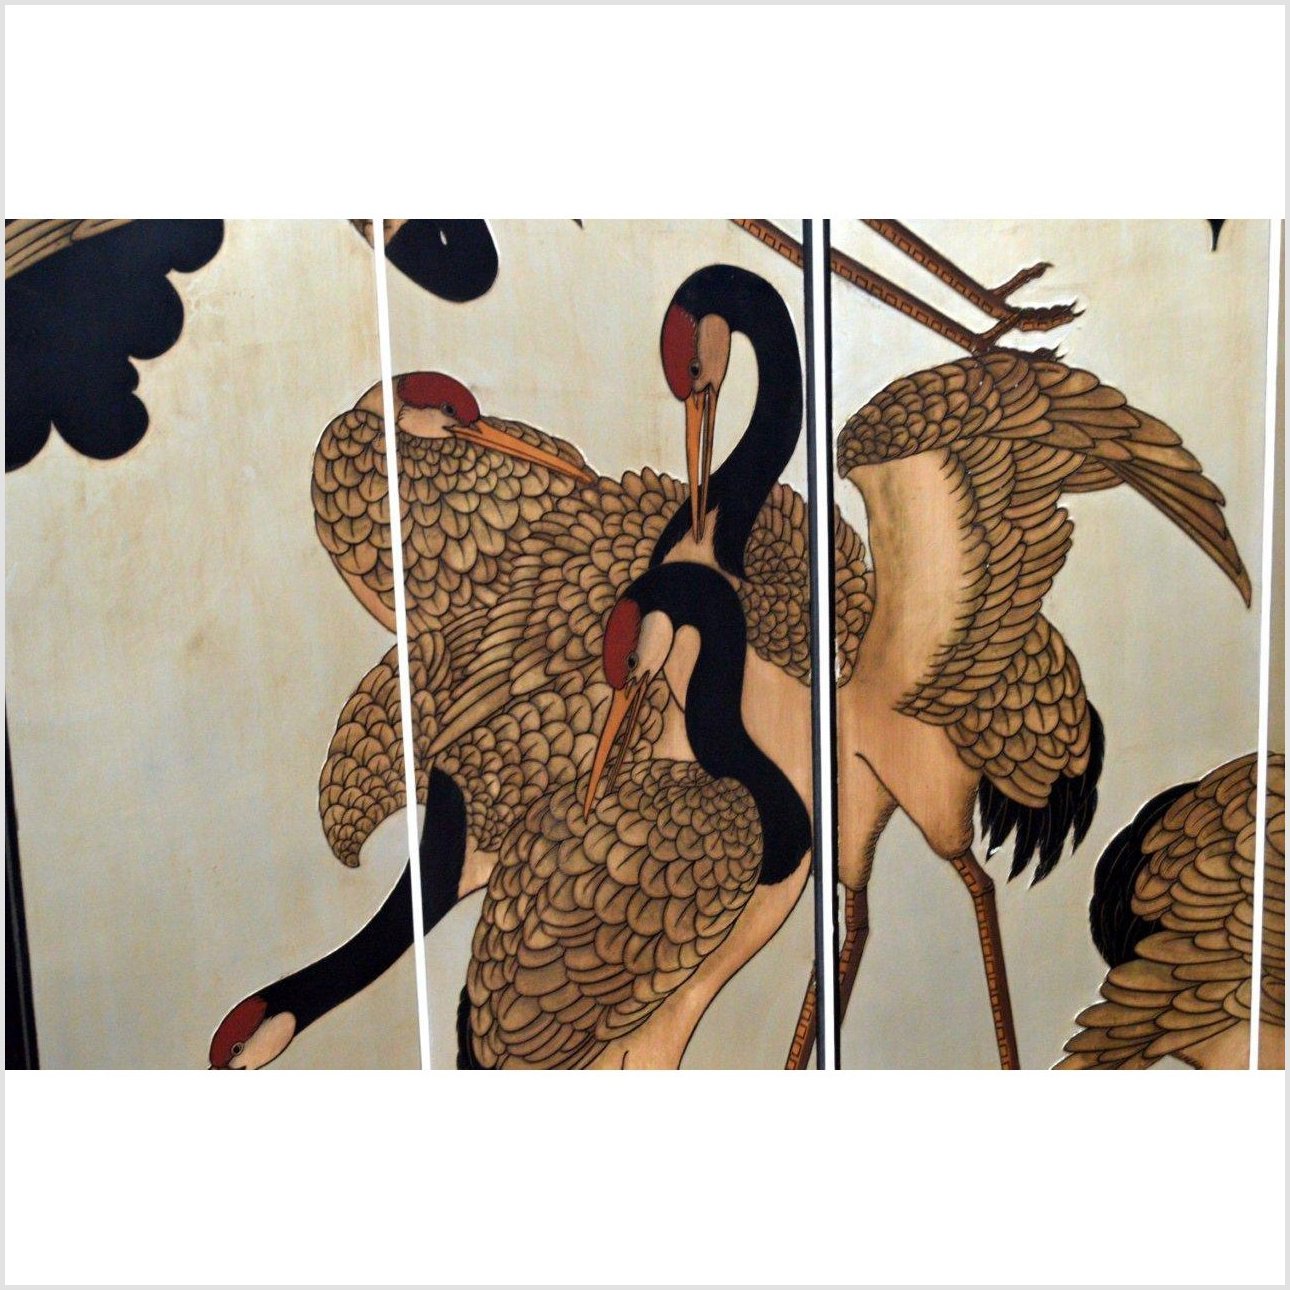 4-Panel Screen Depicting Flock of Cranes-YN2886-5. Asian & Chinese Furniture, Art, Antiques, Vintage Home Décor for sale at FEA Home